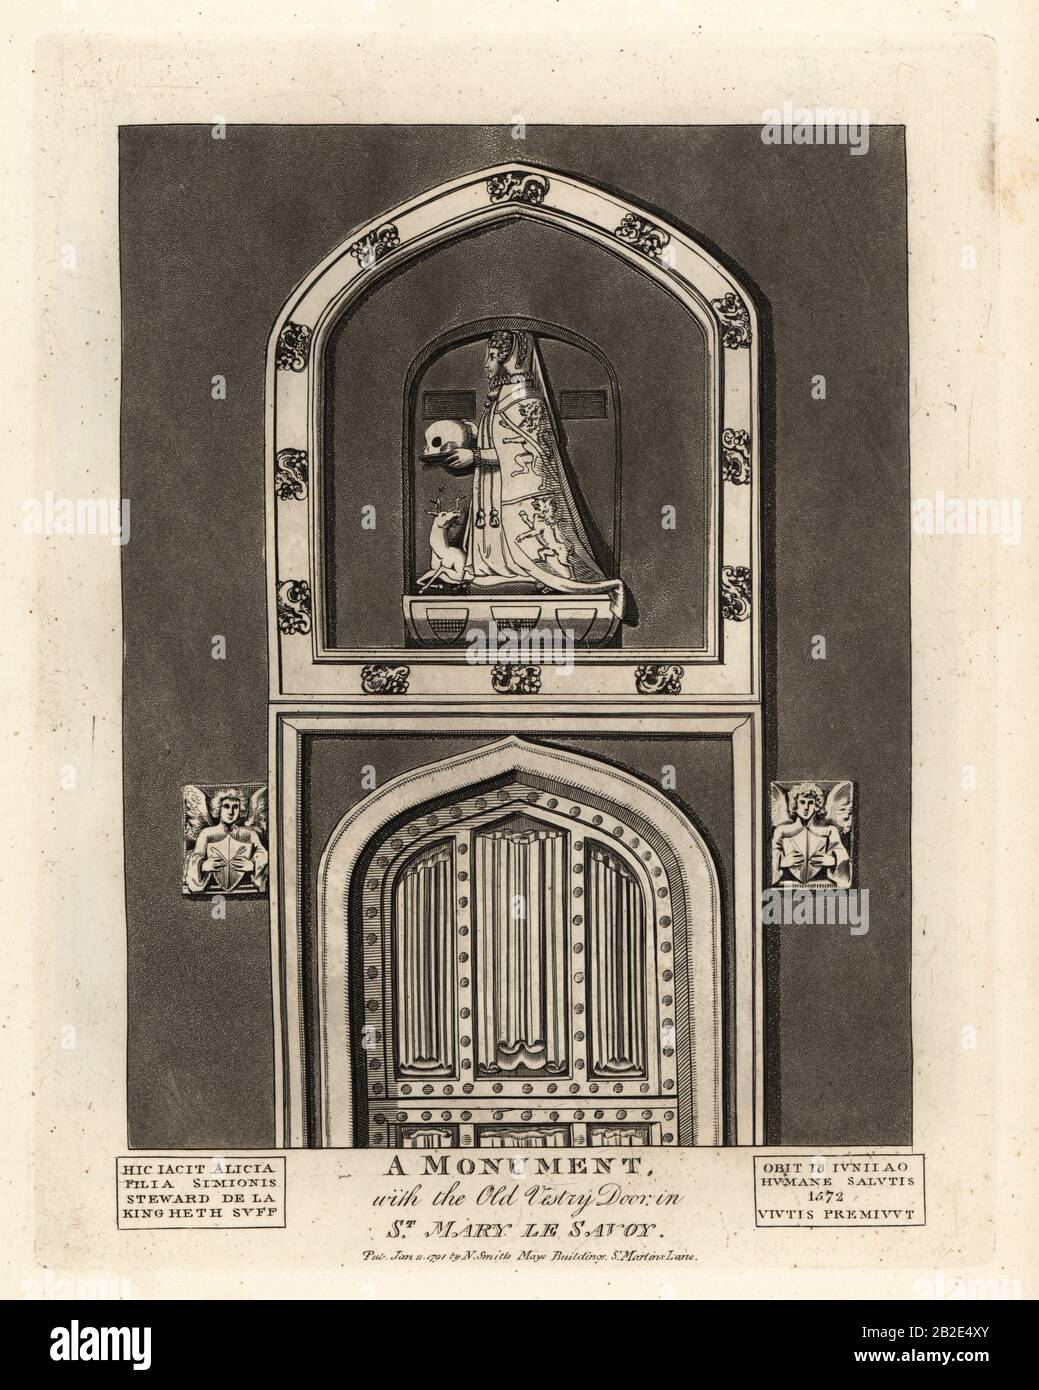 Grave effigy of Alicia, daughter of Simon Steward, with the Old Vestry Door in St. Mary le Savoy. She kneels in an armorial cape holding a skull. Hic jacet Alicia, Filia Simonis Steward de la Kingheth, Suff, obiit 18 Junii 1573. Copperplate engraving by John Thomas Smith after original drawings by members of the Society of Antiquaries from his J.T. Smith’s Antiquities of London and its Environs, J. Sewell, R. Folder, J. Simco, London, 1791. Stock Photo